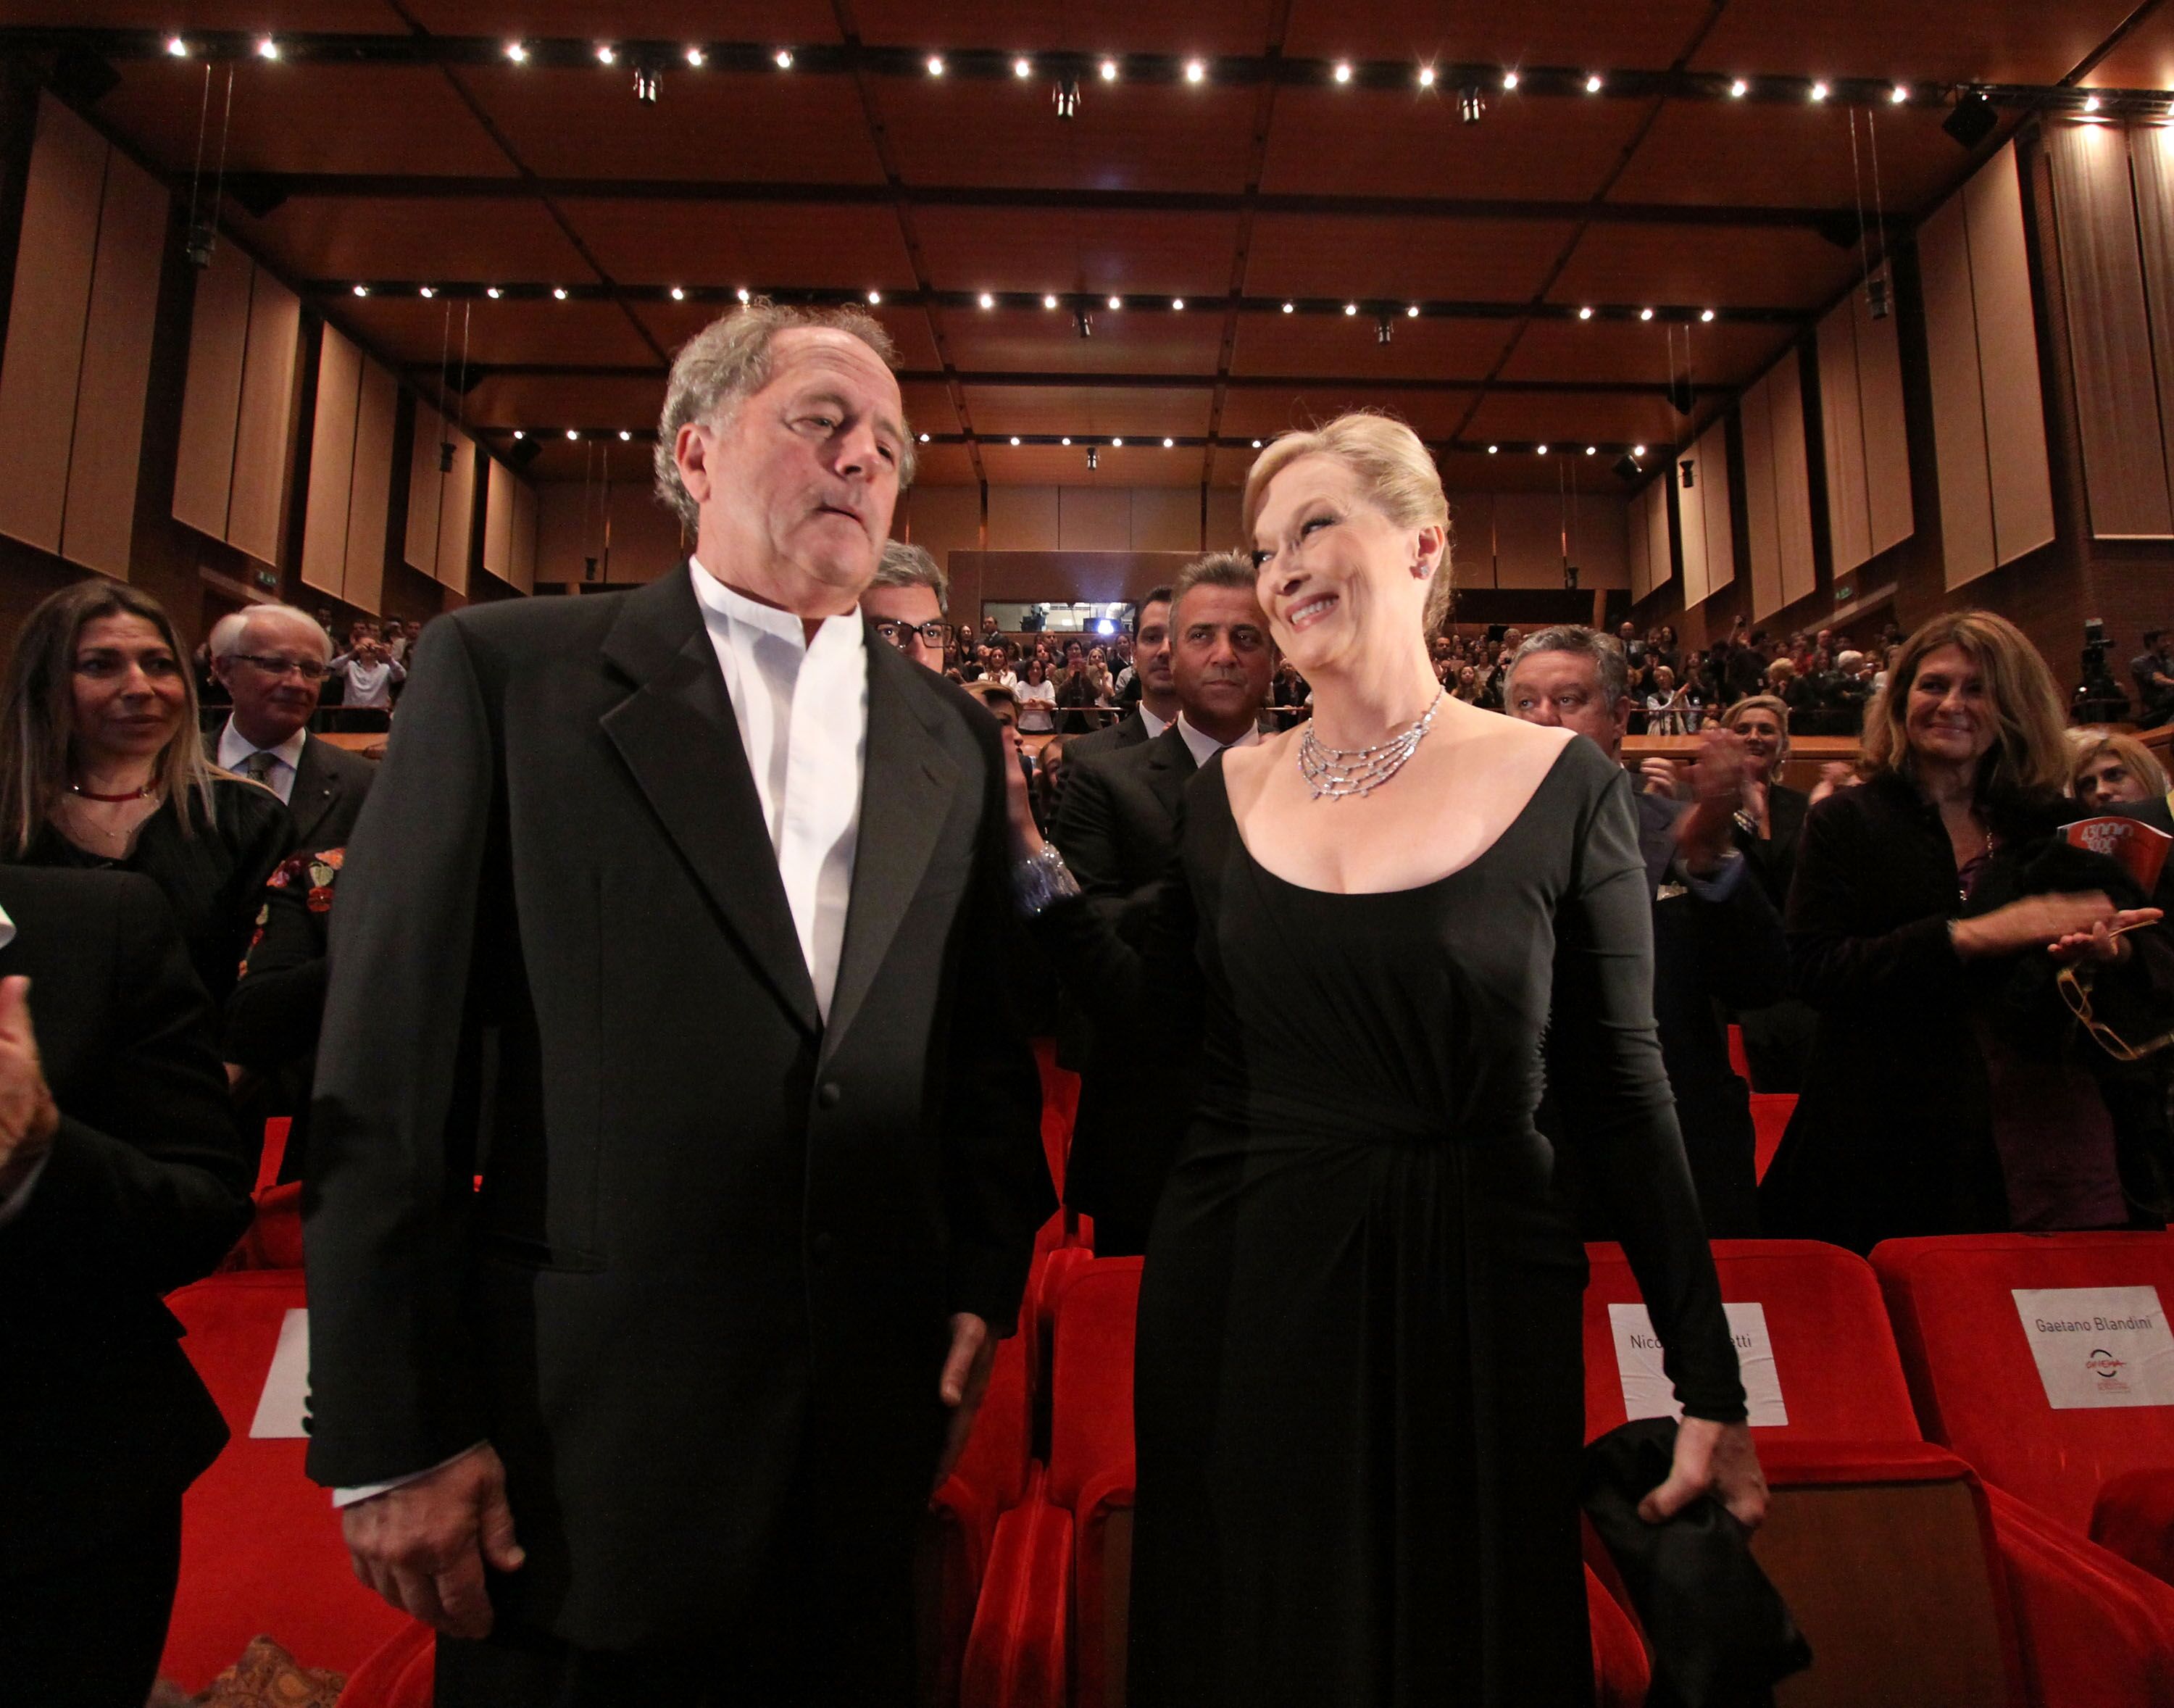 Meryl Streep and her husband Don Gummer during the Official Awards Ceremony. | Source: Getty Images